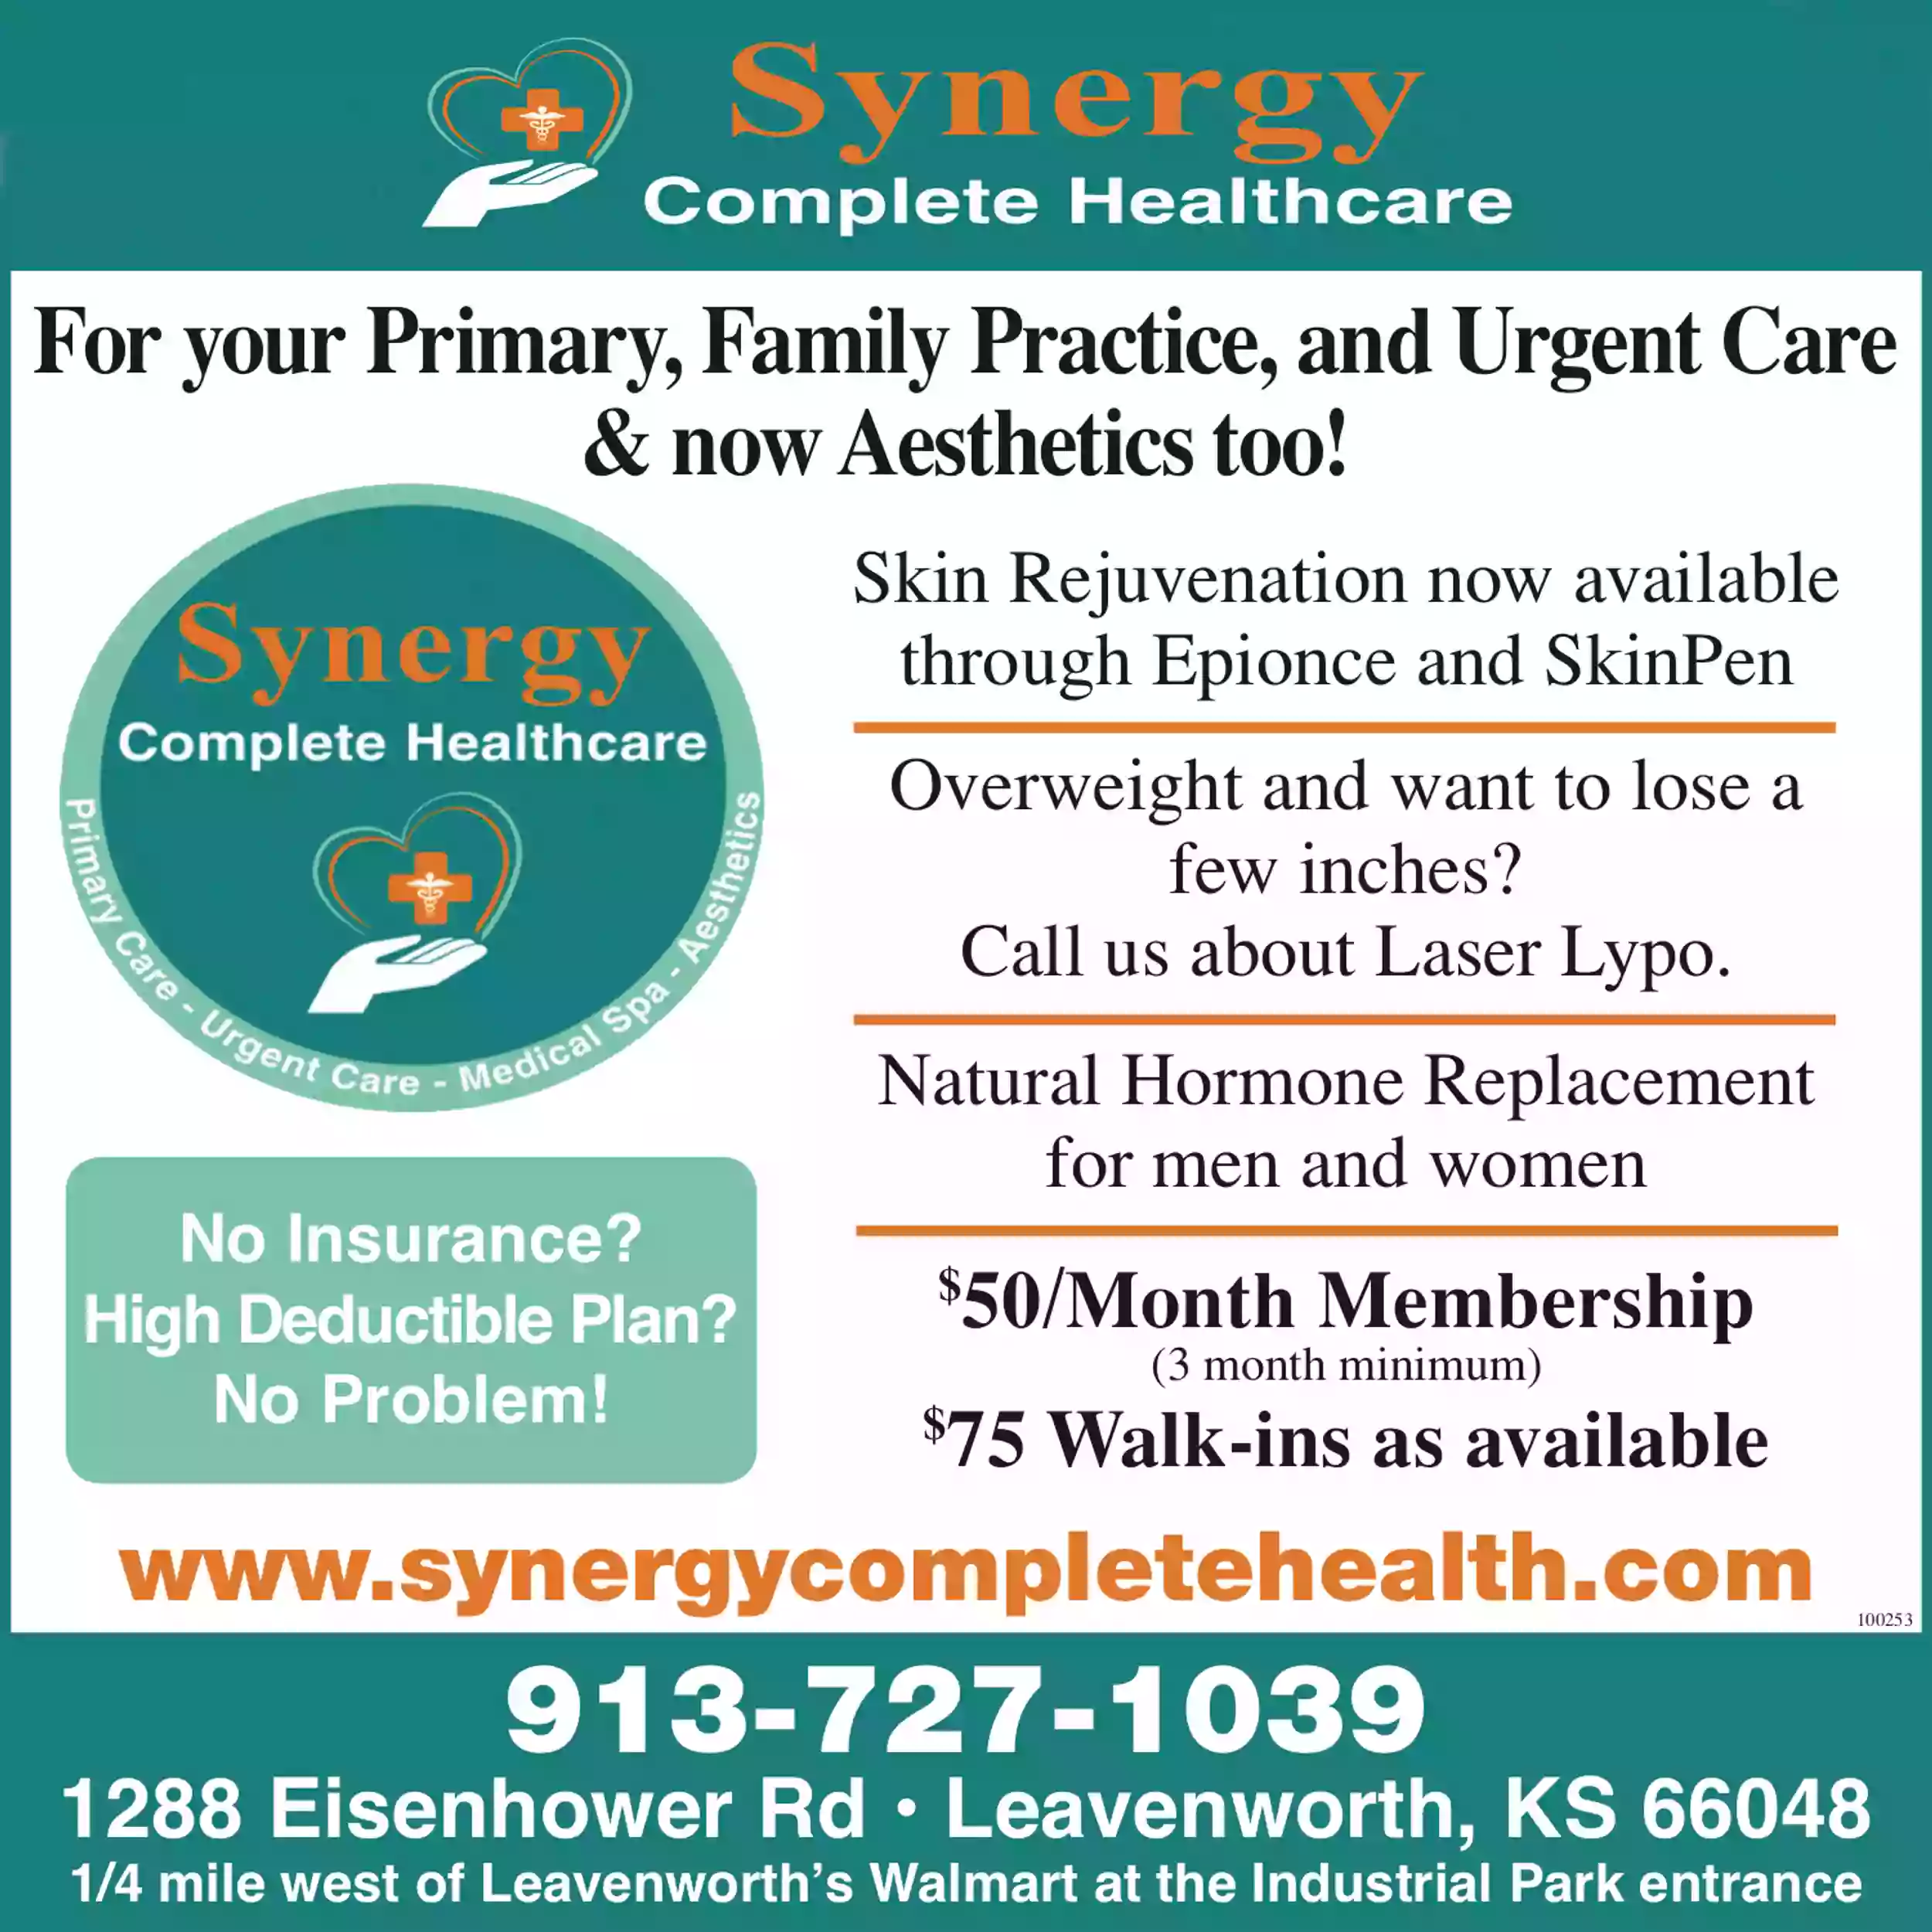 Synergy Complete Healthcare